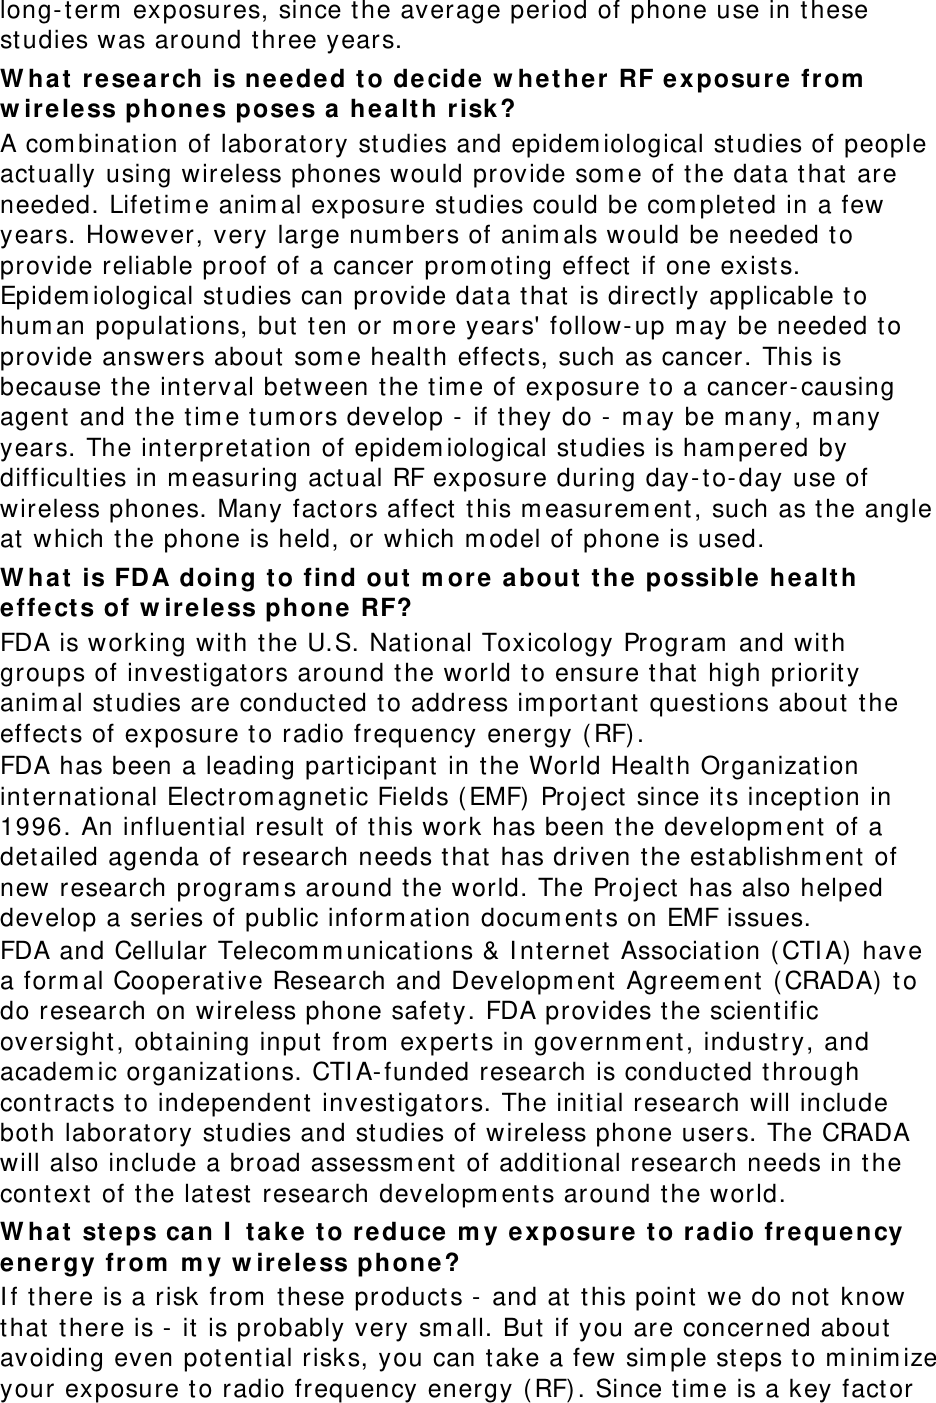 long- t erm  exposures, since the average period of phone use in these studies was around three years. W ha t re search  is needed to de cide w het he r RF exposure from  w ireless phones pose s a  he alt h r isk ? A com binat ion of laboratory st udies and epidem iological st udies of people act ually using wireless phones would provide som e of t he dat a t hat  are needed. Lifetim e anim al exposure st udies could be com pleted in a few years. However, very large num bers of anim als would be needed to provide reliable proof of a cancer prom ot ing effect  if one exists. Epidem iological st udies can provide data t hat  is direct ly applicable t o hum an populations, but ten or m ore years&apos; follow- up m ay be needed to provide answers about som e health effect s, such as cancer. This is because t he int erval bet ween t he t im e of exposure t o a cancer- causing agent and t he t im e t um ors develop -  if t hey do -  m ay be m any, m any years. The int erpret at ion of epidem iological studies is ham pered by difficult ies in m easuring act ual RF exposure during day-t o-day use of wireless phones. Many fact ors affect this m easurem ent , such as the angle at  which t he phone is held, or which m odel of phone is used. W ha t is FDA doing to find out  m ore a bout  t he possible h ea lt h effe cts of w ire less phone  RF? FDA is working wit h the U.S. Nat ional Toxicology Program  and with groups of invest igators around t he world to ensure t hat  high priorit y anim al st udies are conduct ed t o address im port ant  quest ions about  t he effects of exposure to radio frequency energy ( RF) . FDA has been a leading part icipant in the World Healt h Organizat ion int ernat ional Elect rom agnet ic Fields (EMF)  Proj ect since it s incept ion in 1996. An influential result of this work has been t he developm ent  of a detailed agenda of research needs t hat  has driven t he establishm ent  of new research program s around t he world. The Proj ect  has also helped develop a series of public inform at ion docum ents on EMF issues. FDA and Cellular Telecom m unications &amp; I nternet Associat ion ( CTI A)  have a form al Cooperative Research and Developm ent Agreem ent ( CRADA)  to do research on wireless phone safet y. FDA provides t he scient ific oversight , obt aining input from  expert s in governm ent , indust ry, and academ ic organizat ions. CTI A- funded research is conducted through cont ract s t o independent  invest igators. The initial research will include bot h laboratory st udies and st udies of wireless phone users. The CRADA will also include a broad assessm ent of addit ional research needs in t he cont ext  of t he lat est research developm ents around t he world. W ha t st eps ca n I  t a ke t o re duce  m y exposure t o radio fr equency en ergy from  m y w ir eless phone ? I f t here is a risk from  these product s -  and at  this point we do not  know that there is -  it  is probably very sm all. But if you are concerned about  avoiding even pot ential risks, you can t ake a few sim ple steps t o m inim ize your exposure t o radio frequency energy ( RF) . Since t im e is a key fact or 